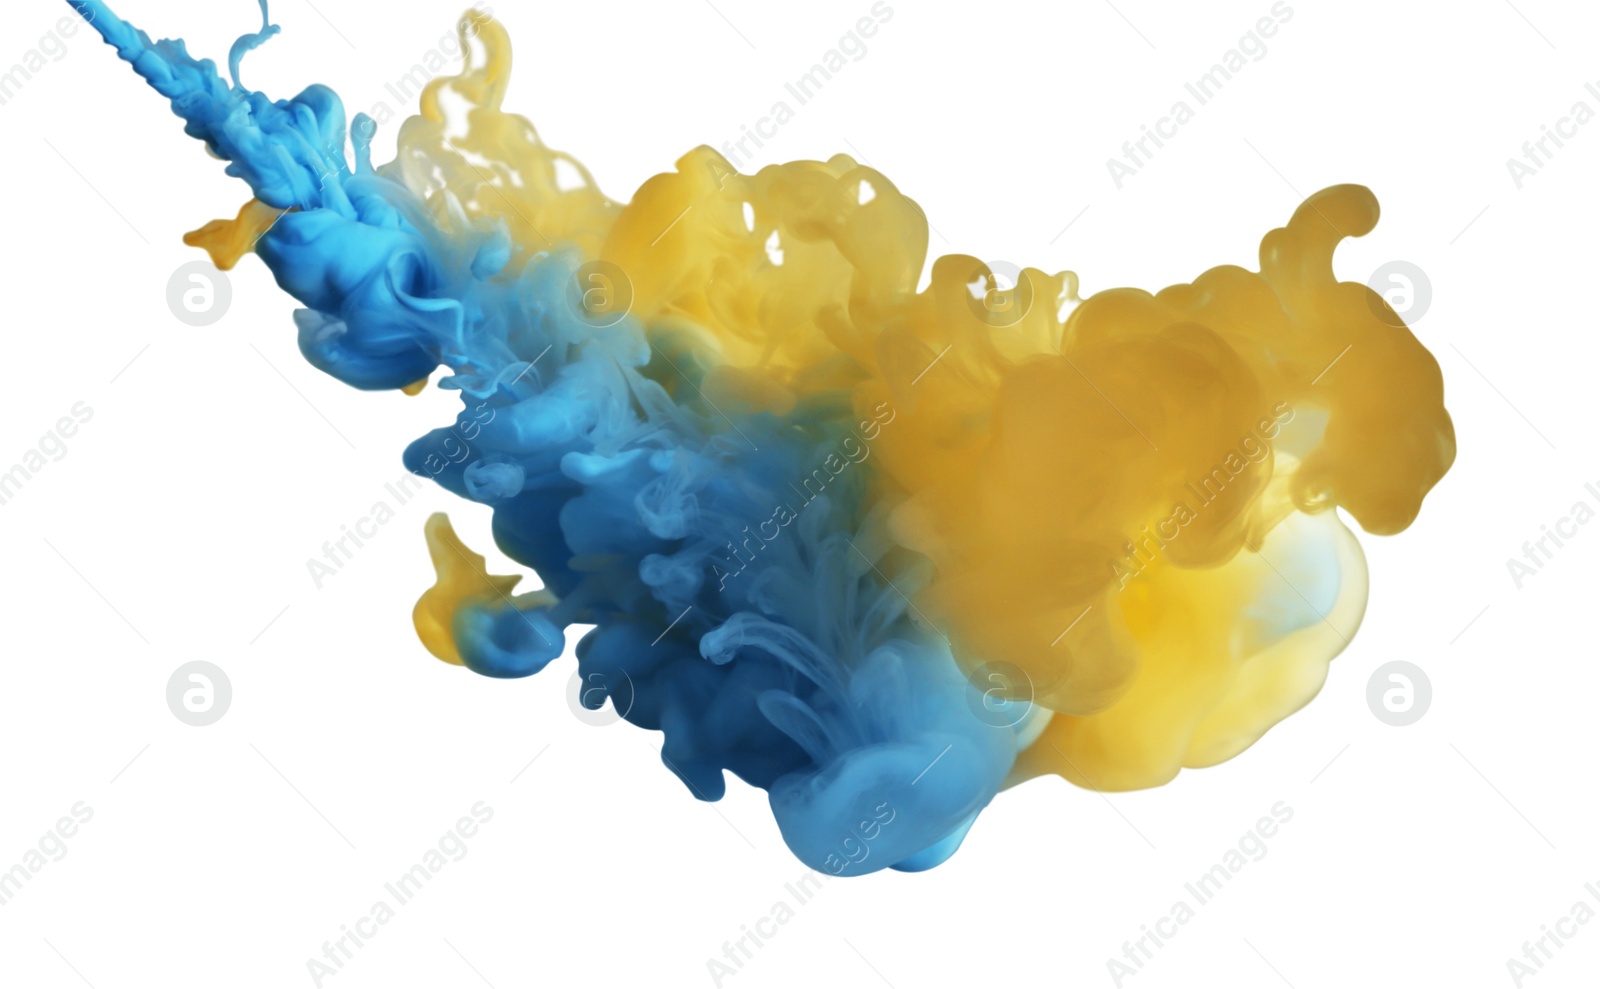 Photo of Splash of yellow and light blue inks on grey background